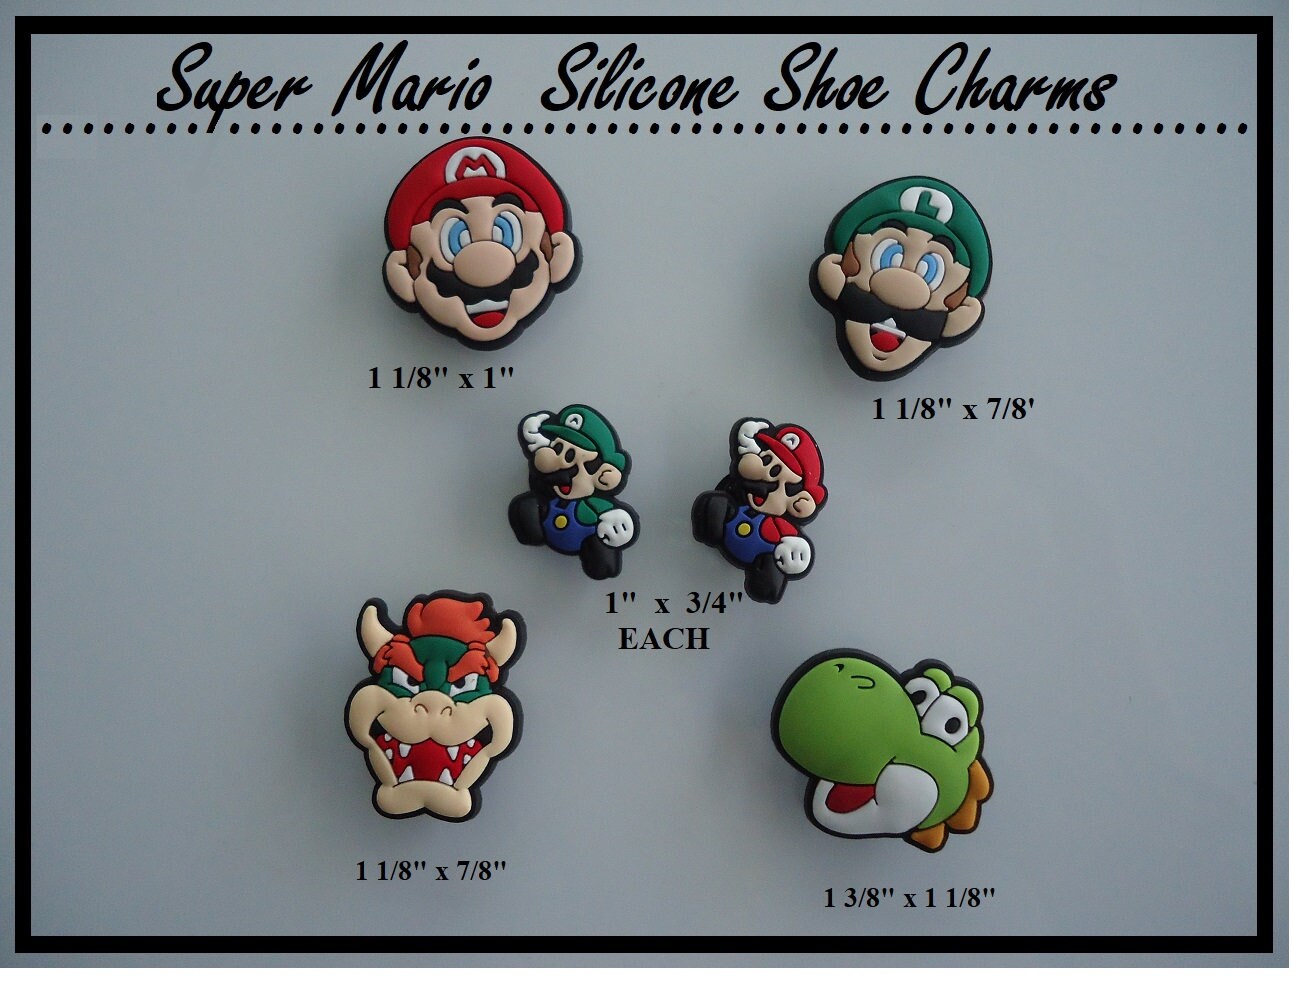 Mario croc charms - Individual or lots of 4 or 8